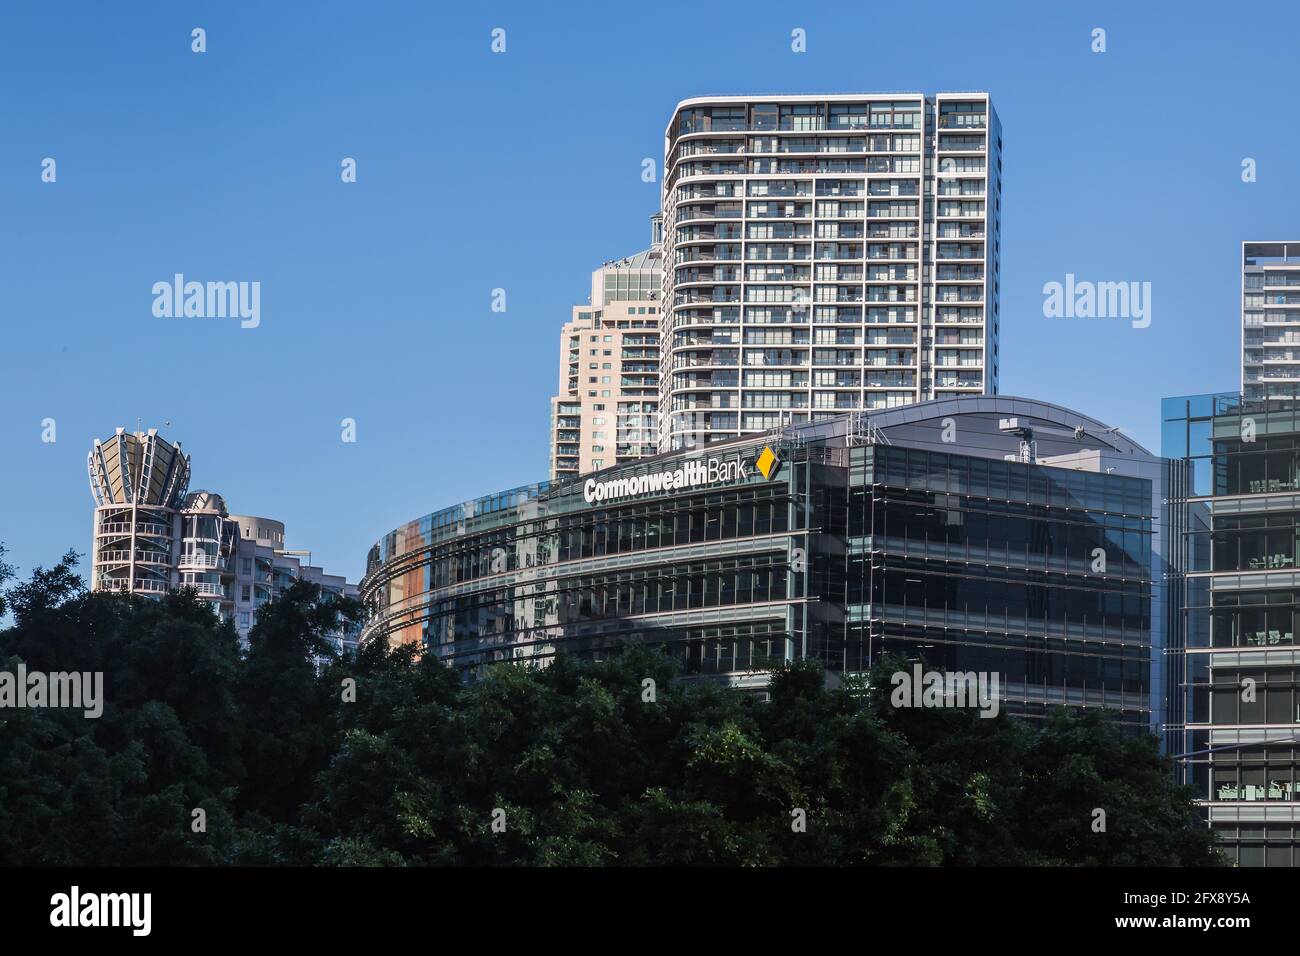 Commonwealth Bank of Australia, Corporate Offices, Darling Harbour, Sydney, Australia. Stock Photo